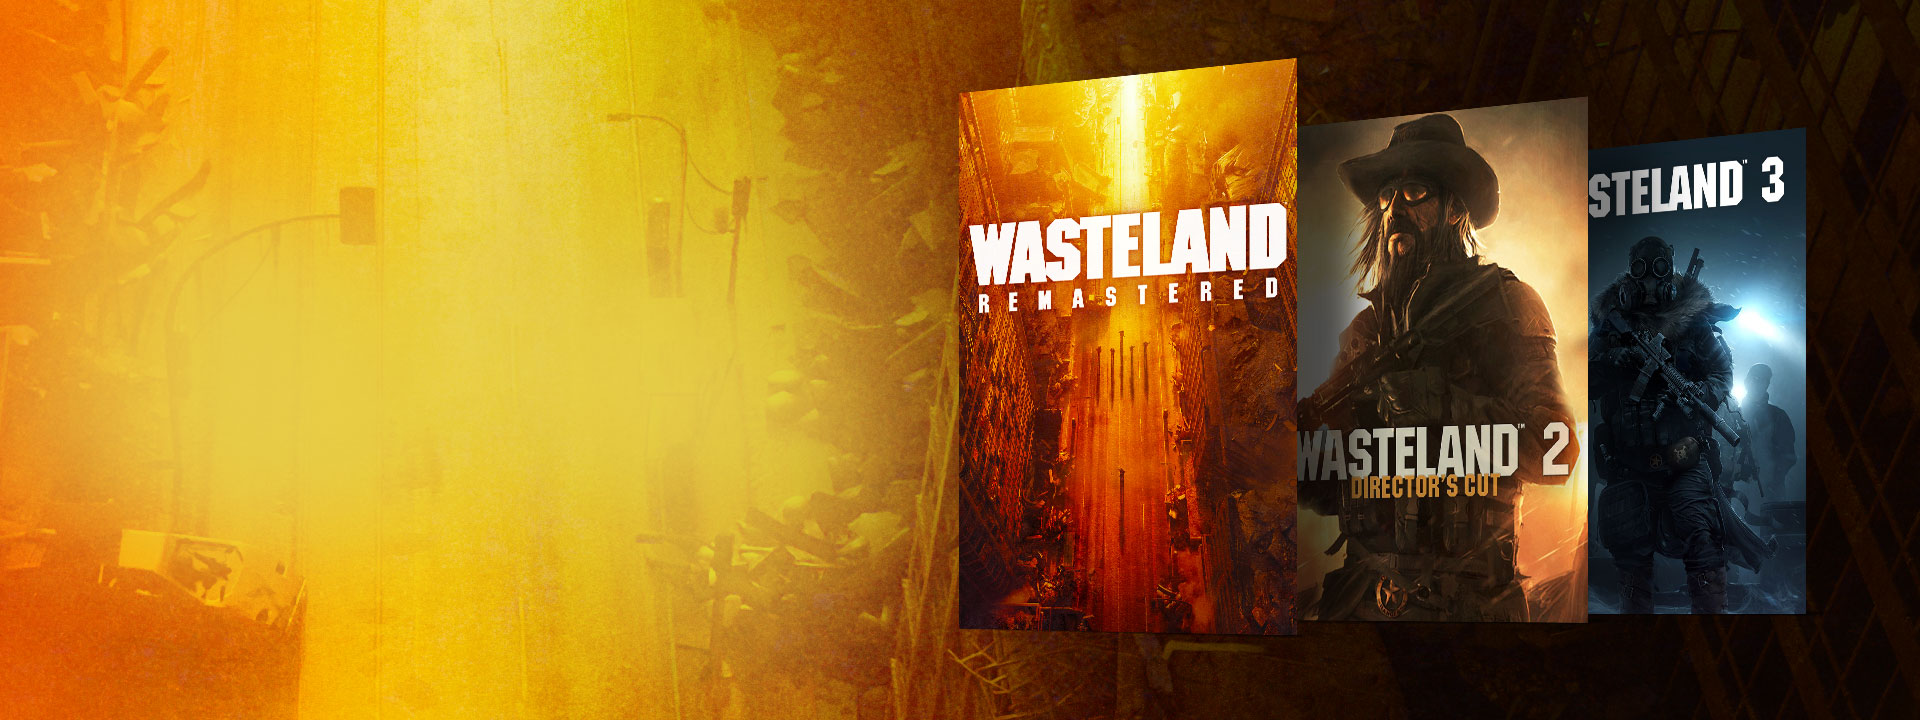 Boxshots of Wasteland Remastered, Wasteland 2 Director’s Cut, and Wasteland 3. A background of an abandoned street with yellow and orange hues